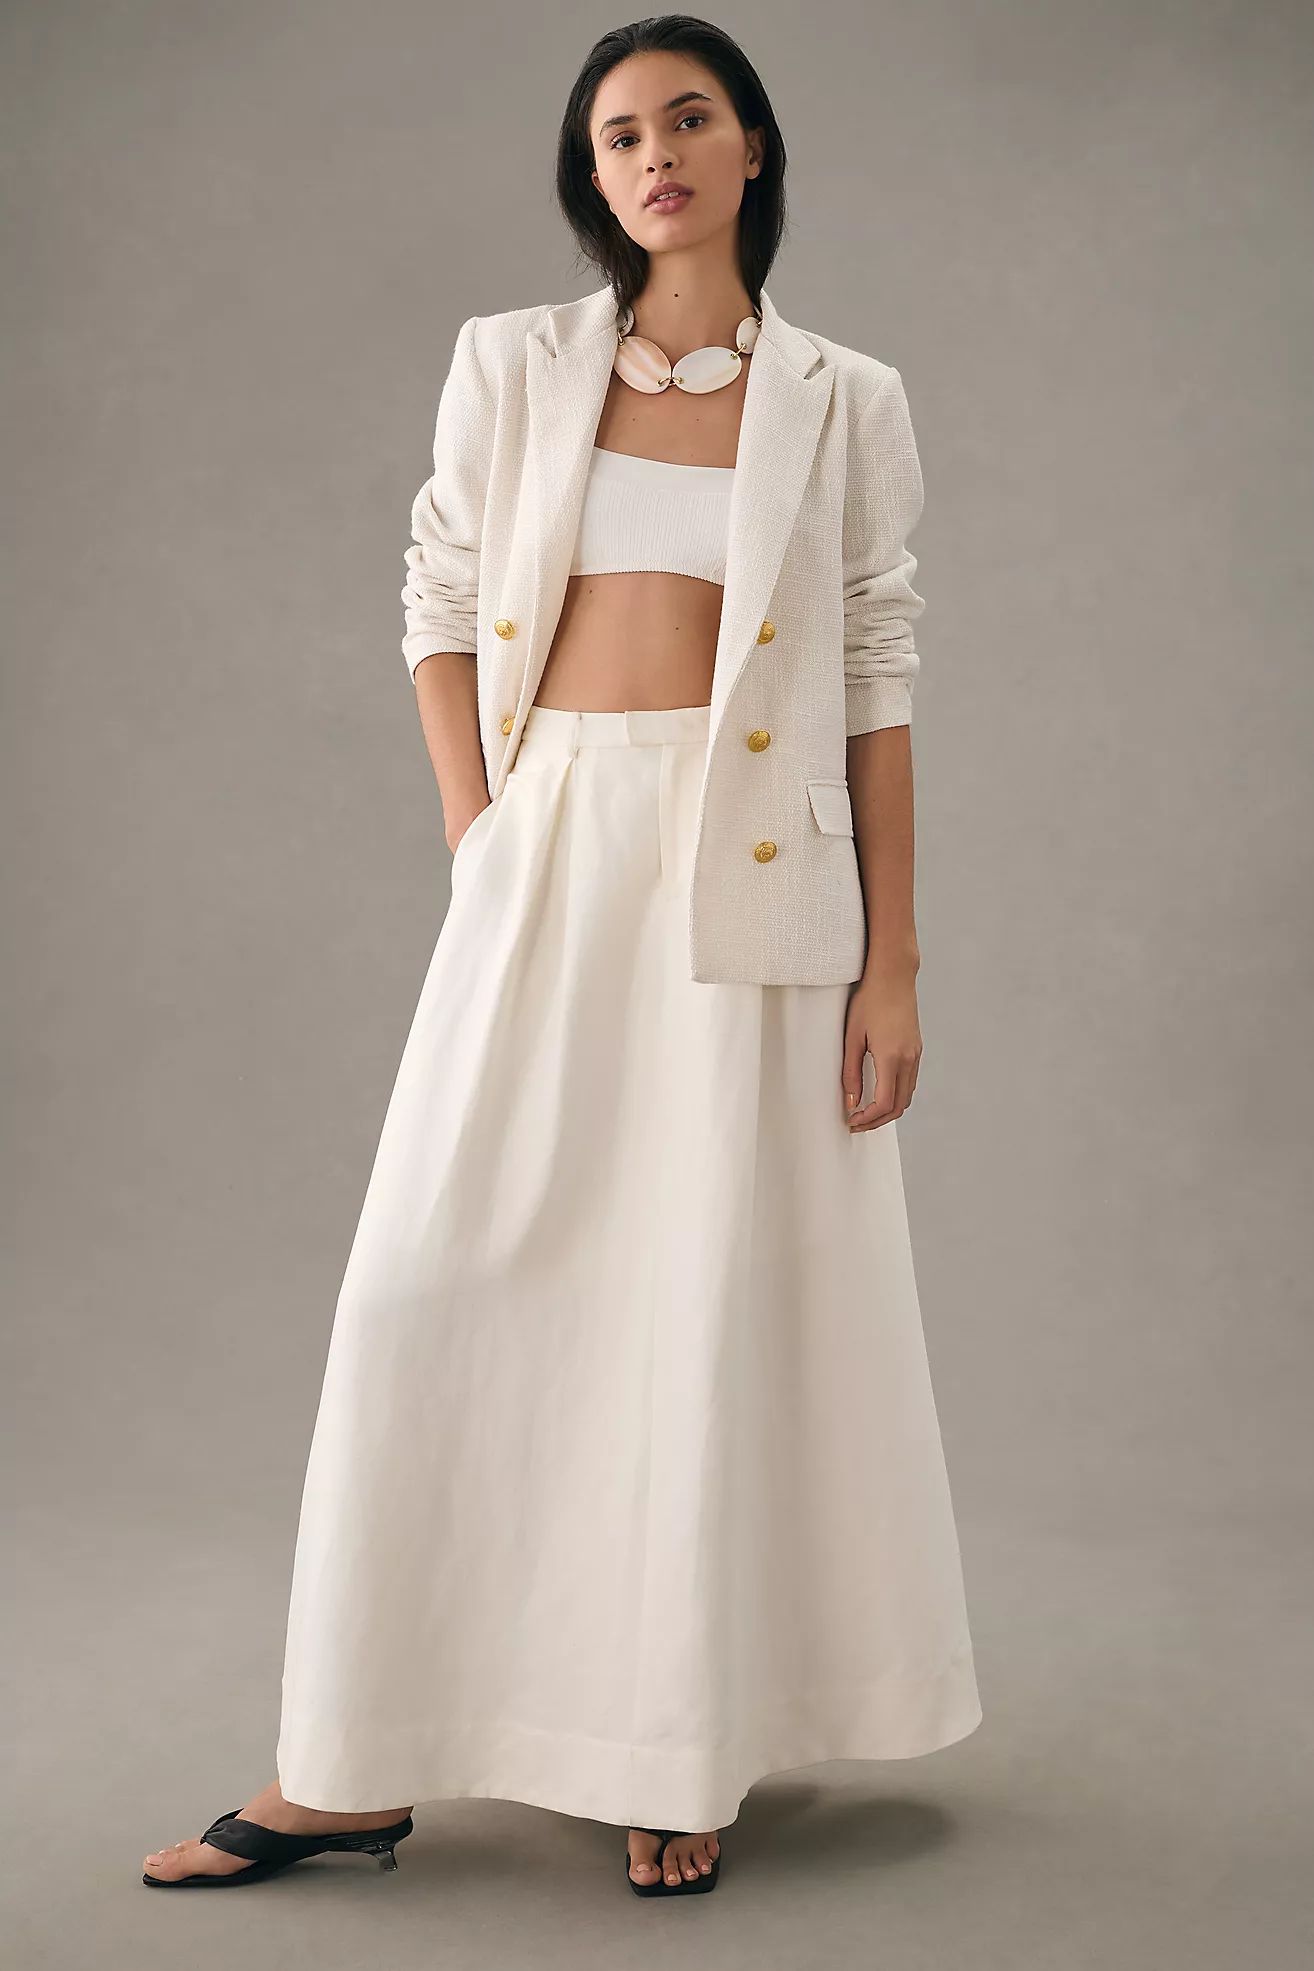 By Anthropologie Pleated Maxi Skirt | Anthropologie (US)